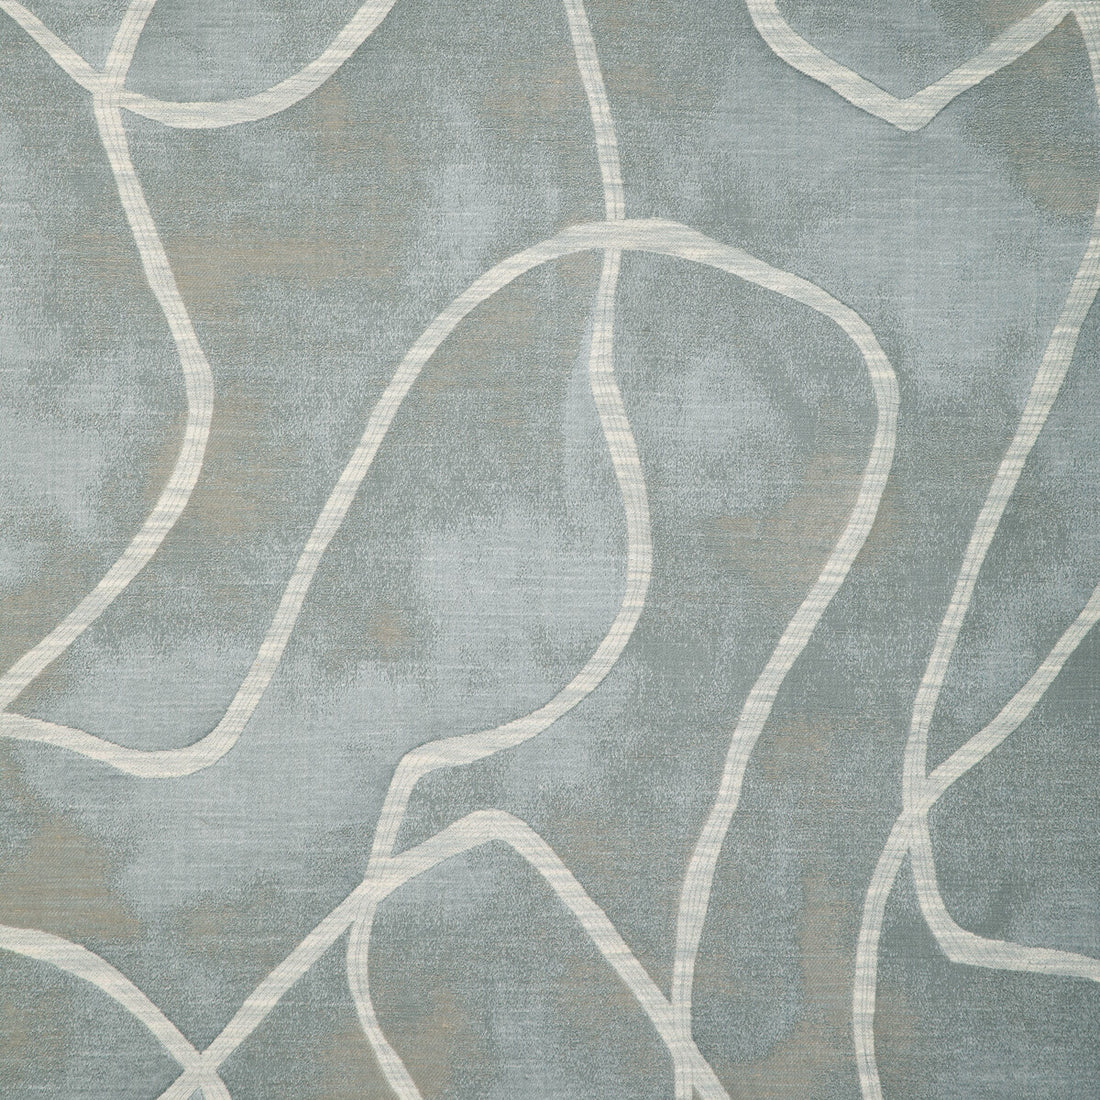 Poetic Motion fabric in spa color - pattern 36808.1516.0 - by Kravet Design in the Candice Olson collection